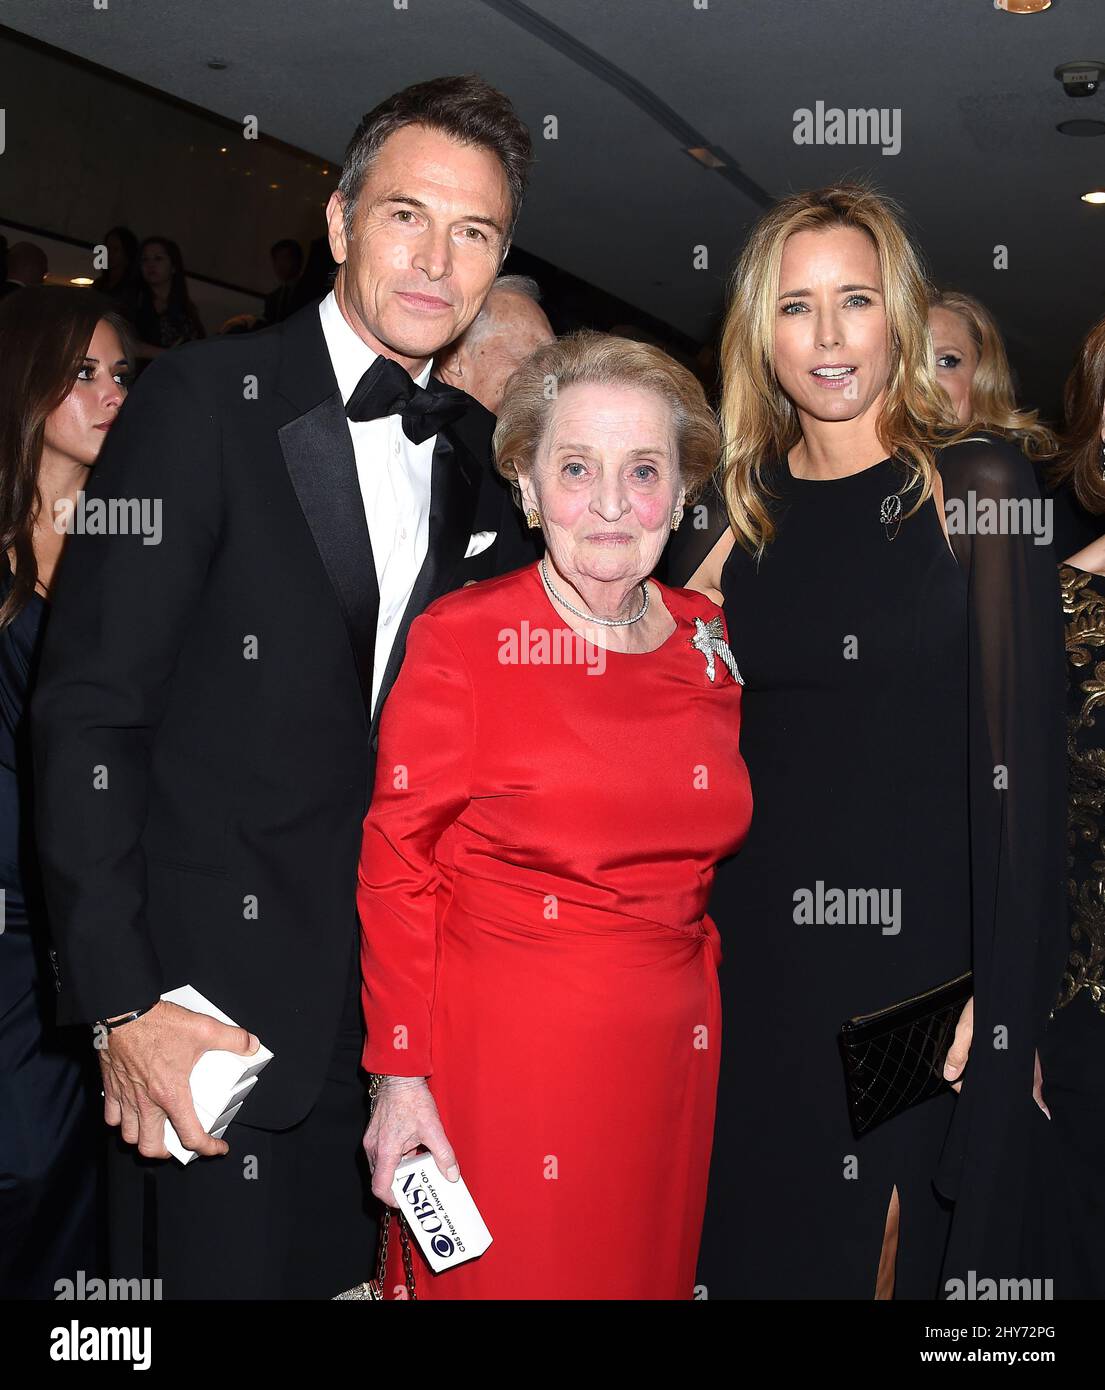 Tim Daly, Madeleine Albright and Tea Leoni attends the White House Correspondents Association Dinner 2015 held at the Hilton Hotel. Stock Photo